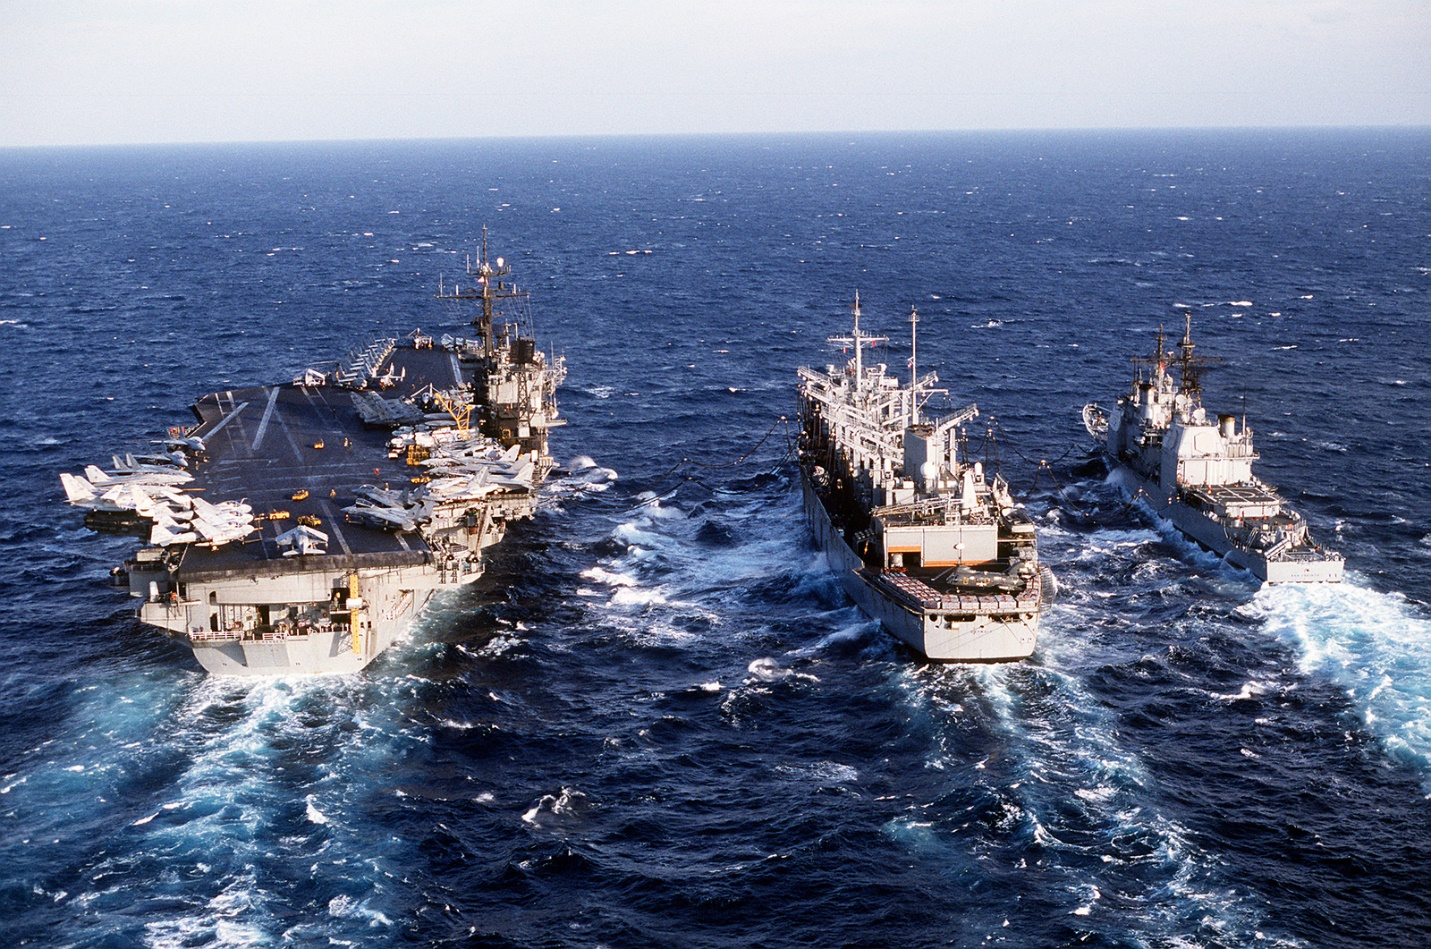 The fast combat support ship USS DETROIT (AOE-4) is flanked by the aircraft carrier USS